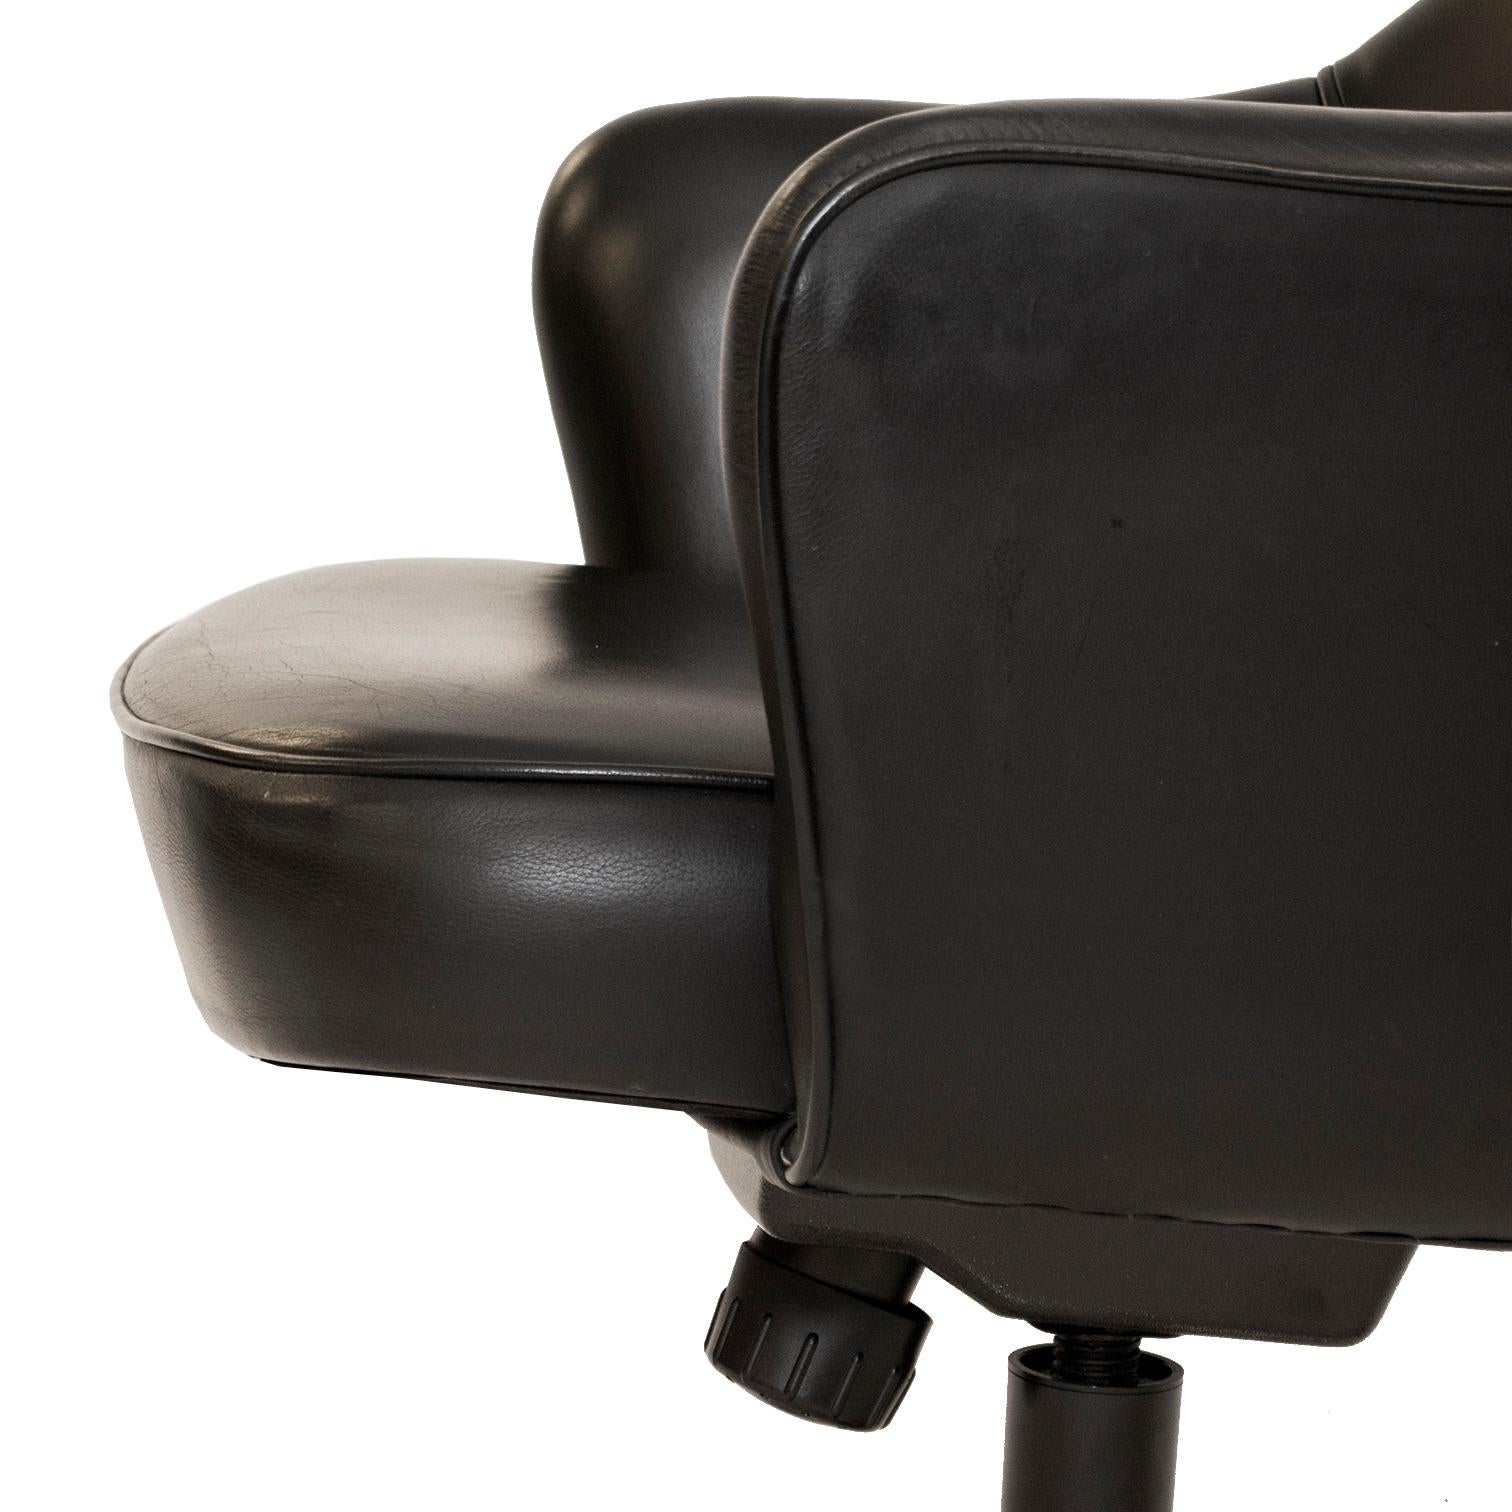 Saarinen Executive Arm Chair in Original Black Leather, Contemporary Swivel Base In Good Condition For Sale In Wilton, CT